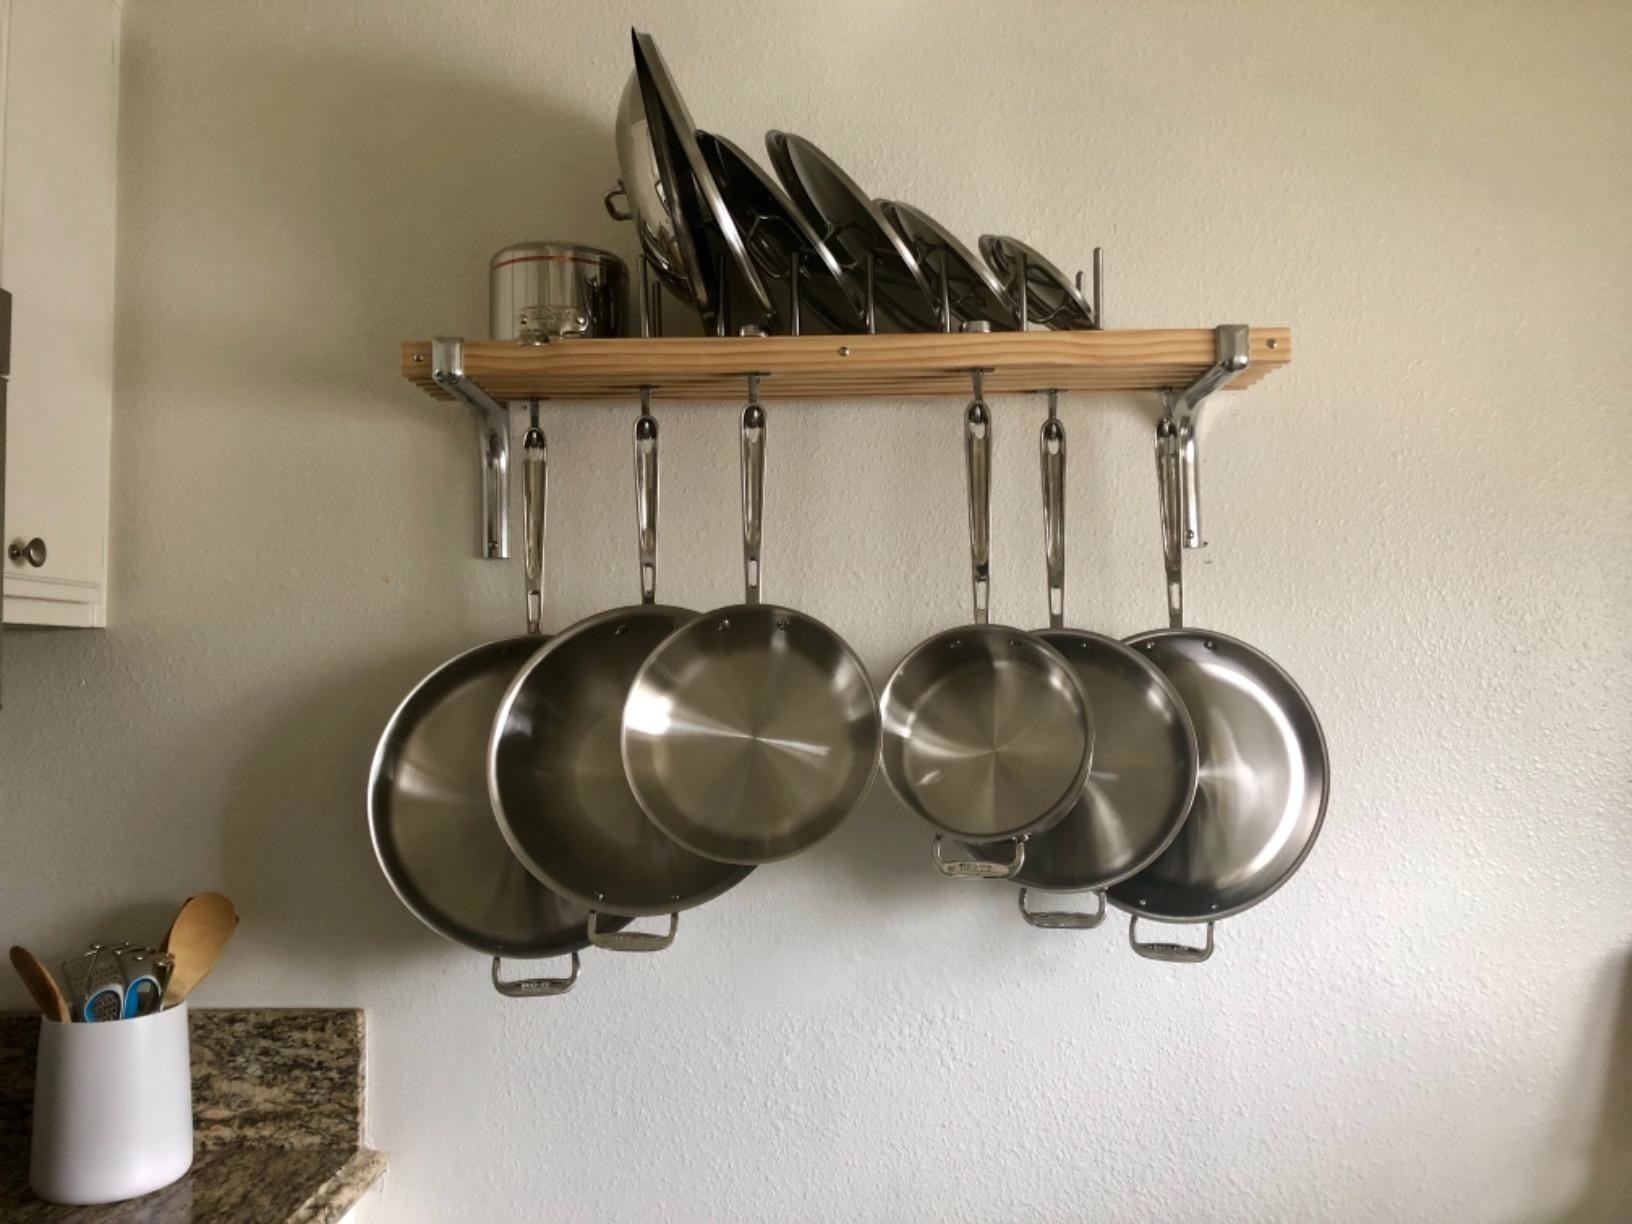 A reviewer&#x27;s photo of the rack holding six pans and their lids on the top shelf